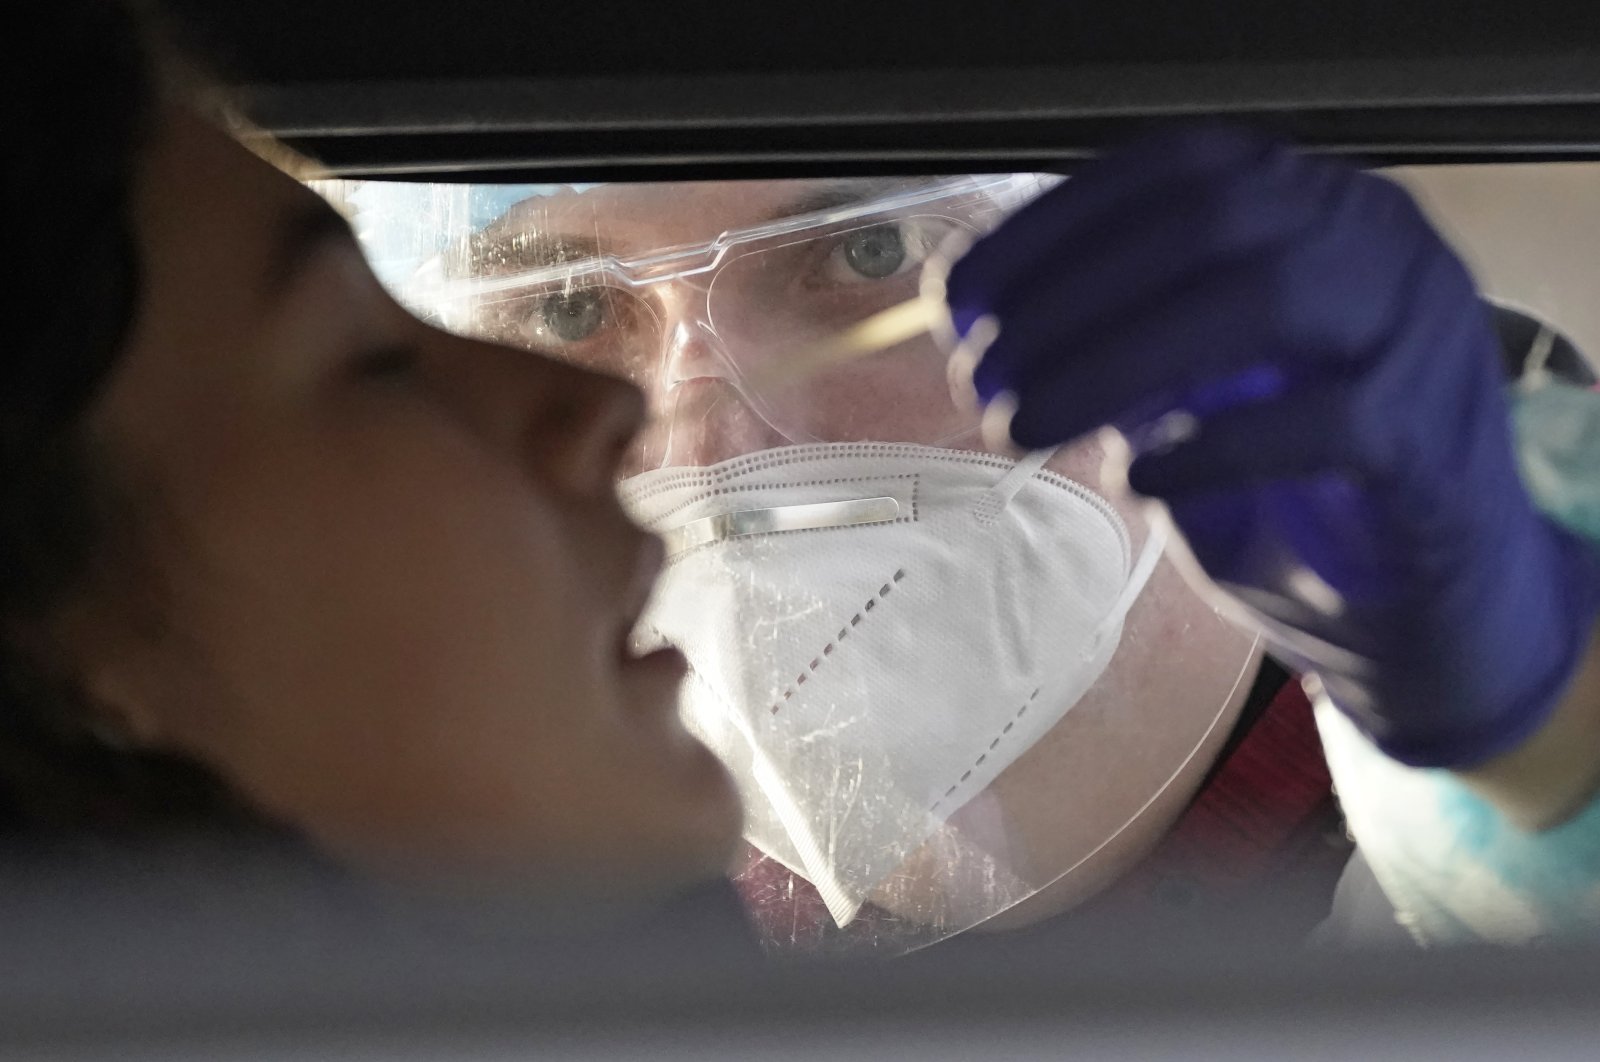 Zoey Marty is tested at the Utah National Guard's mobile testing site for COVID-19, in Salt Lake City, Utah, U.S., Nov. 17, 2020. (AP Photo)